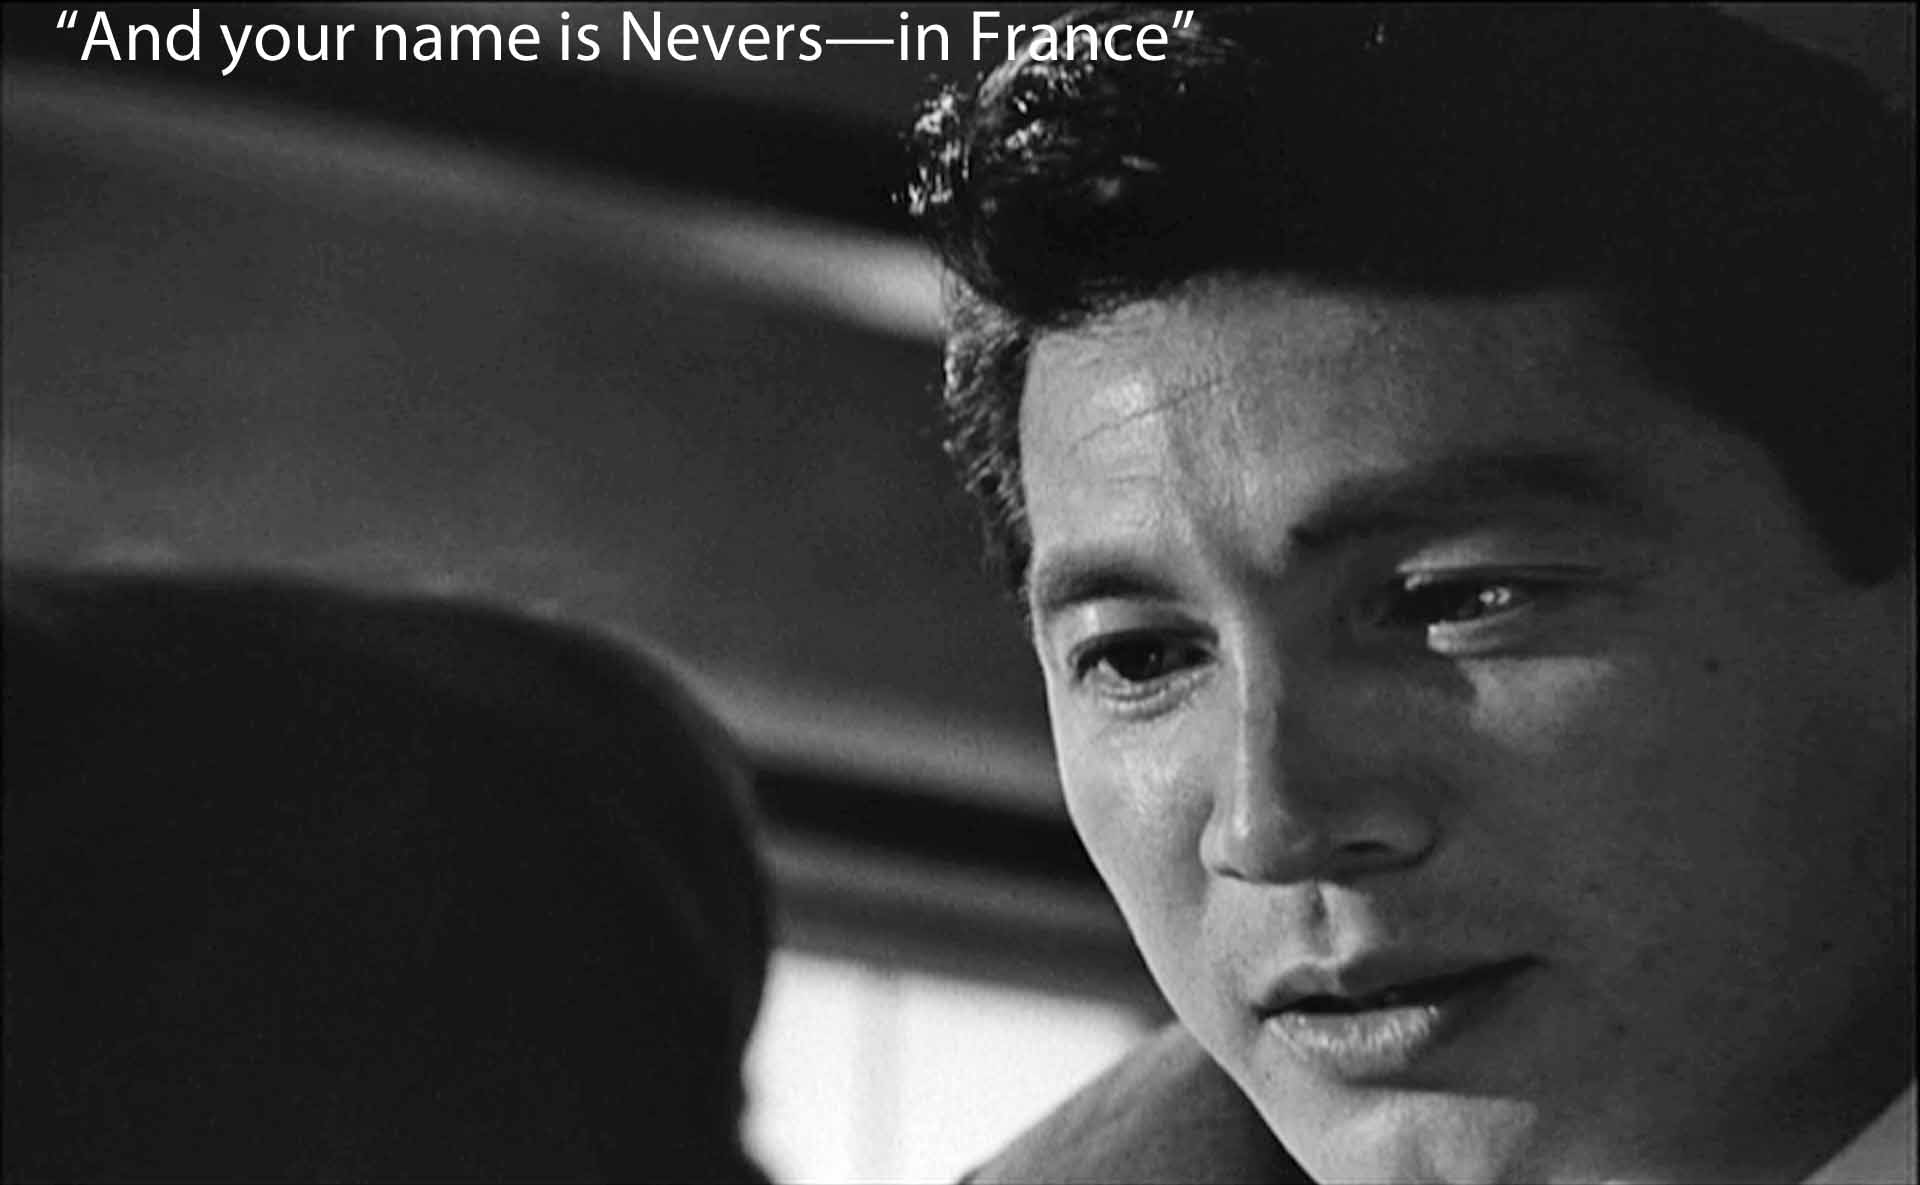 And your name is Nevers--in France